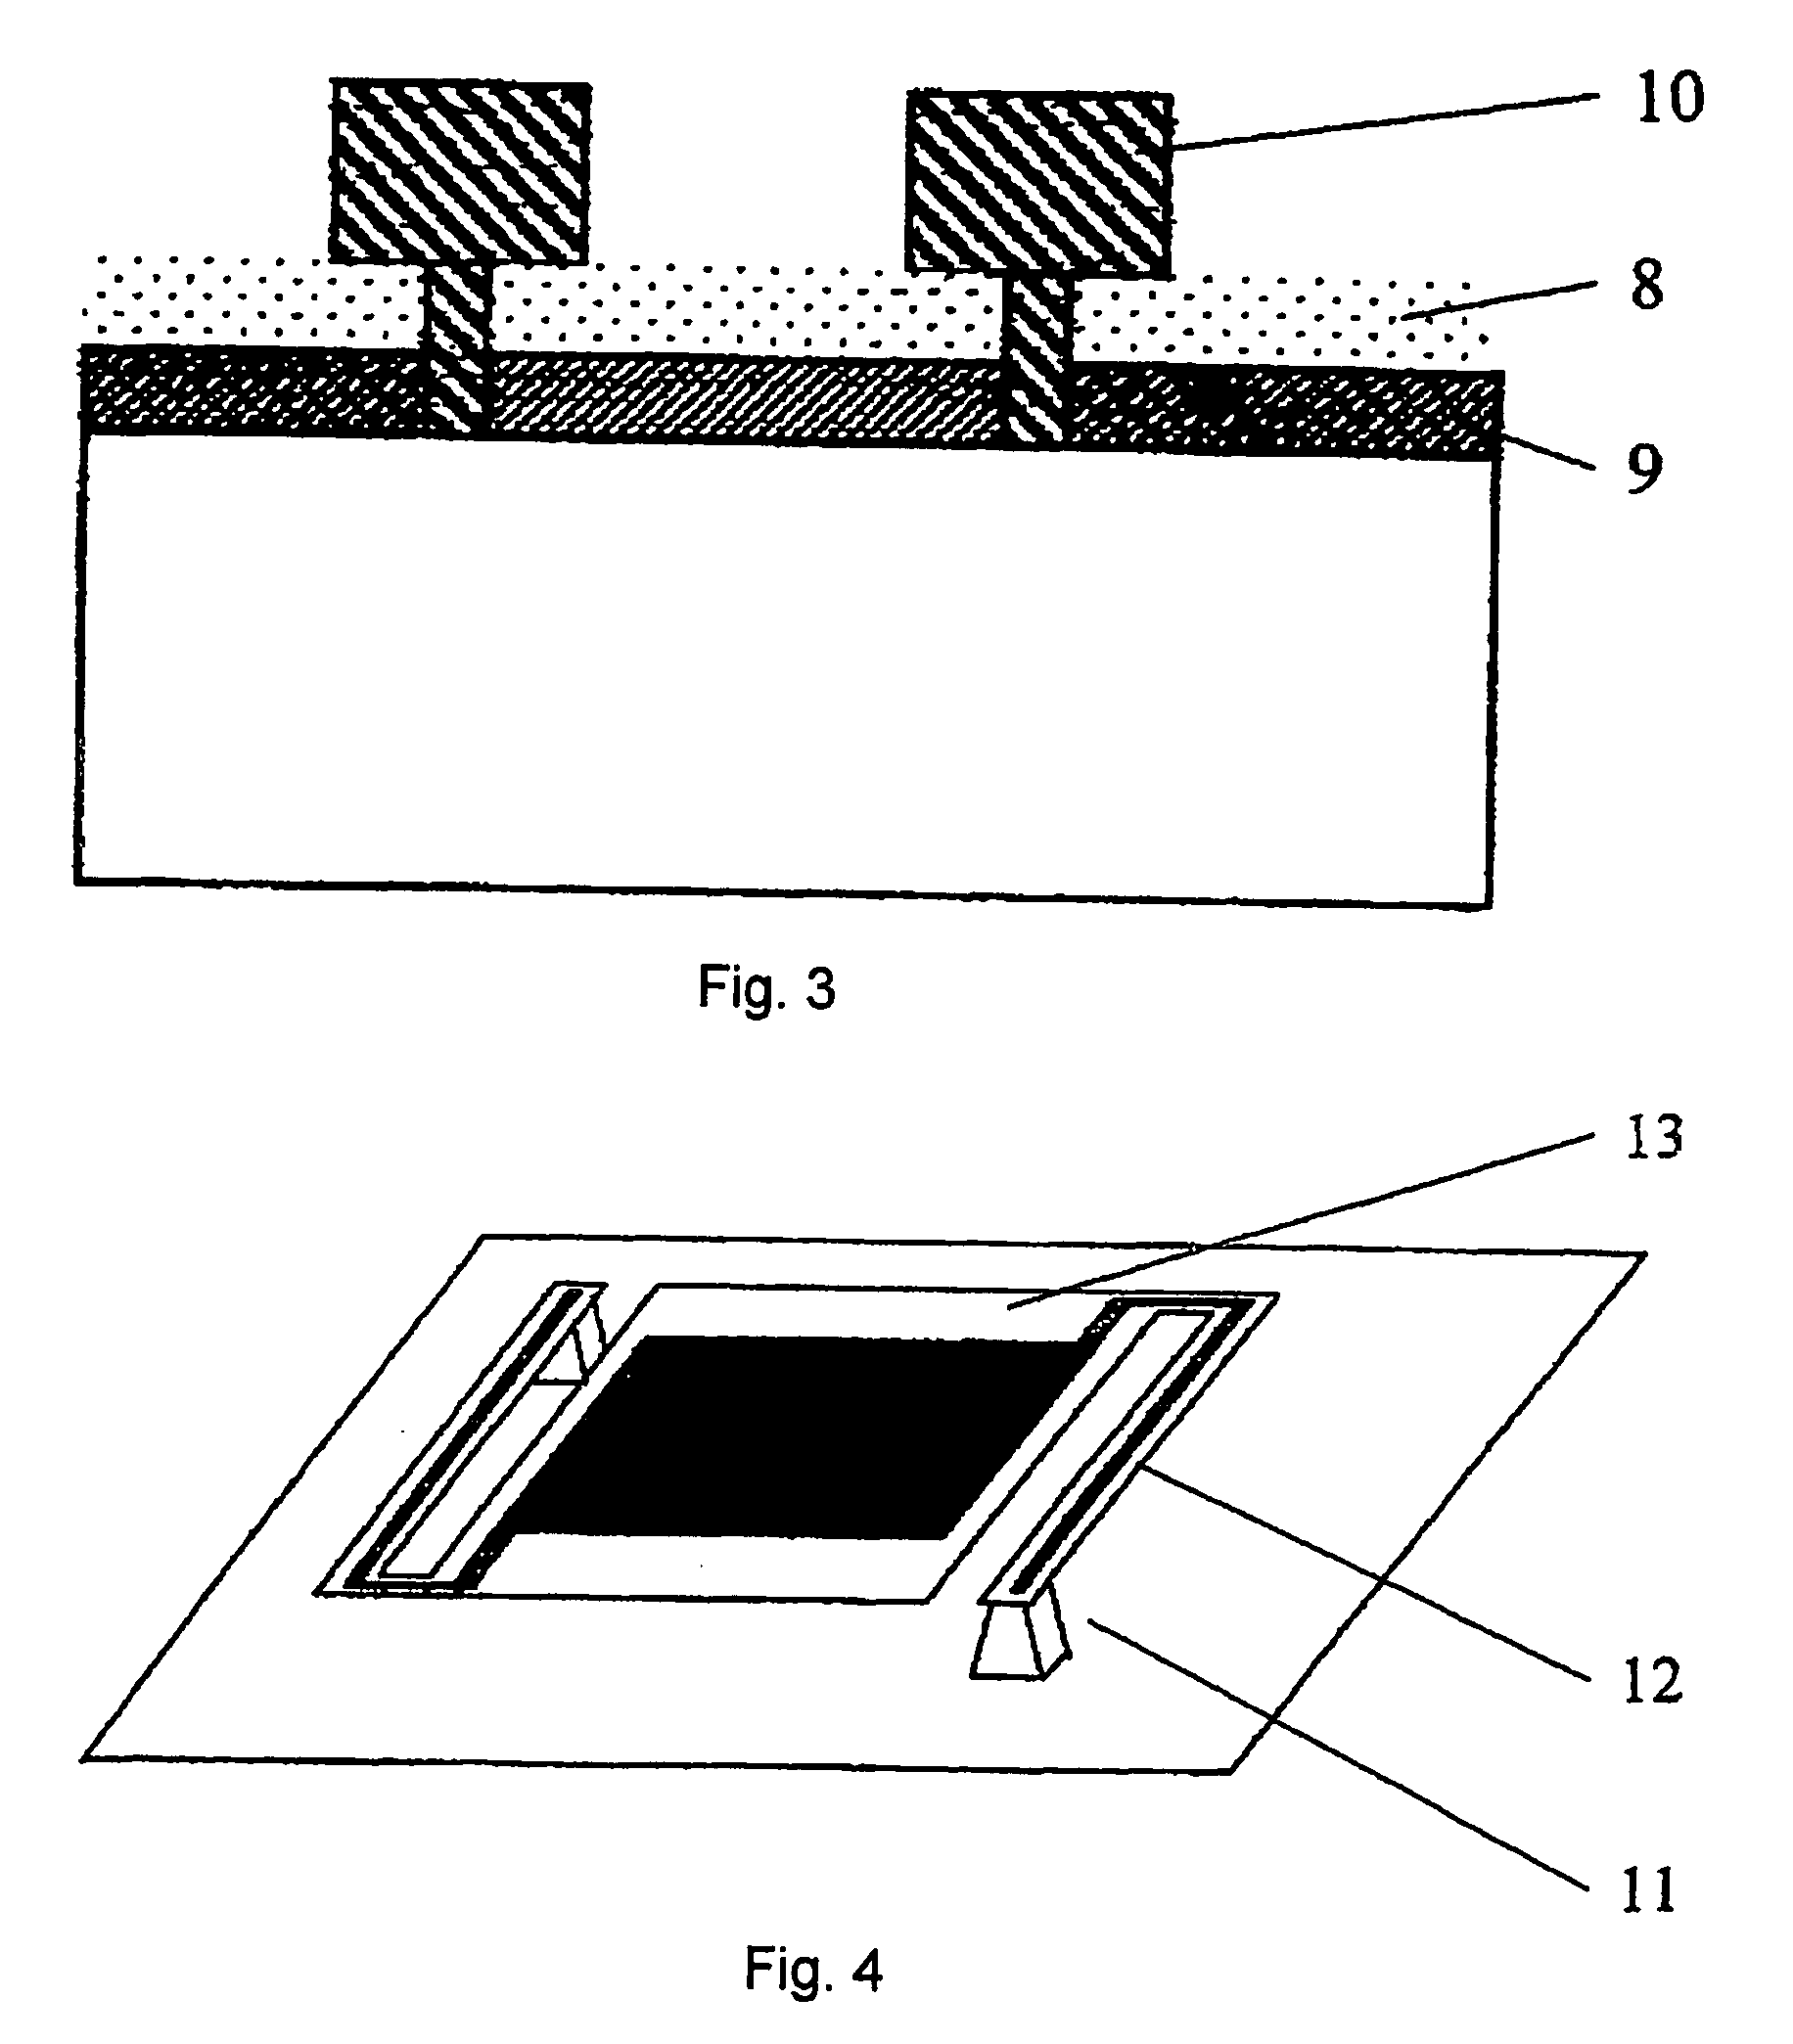 ECR-plasma source and methods for treatment of semiconductor structures